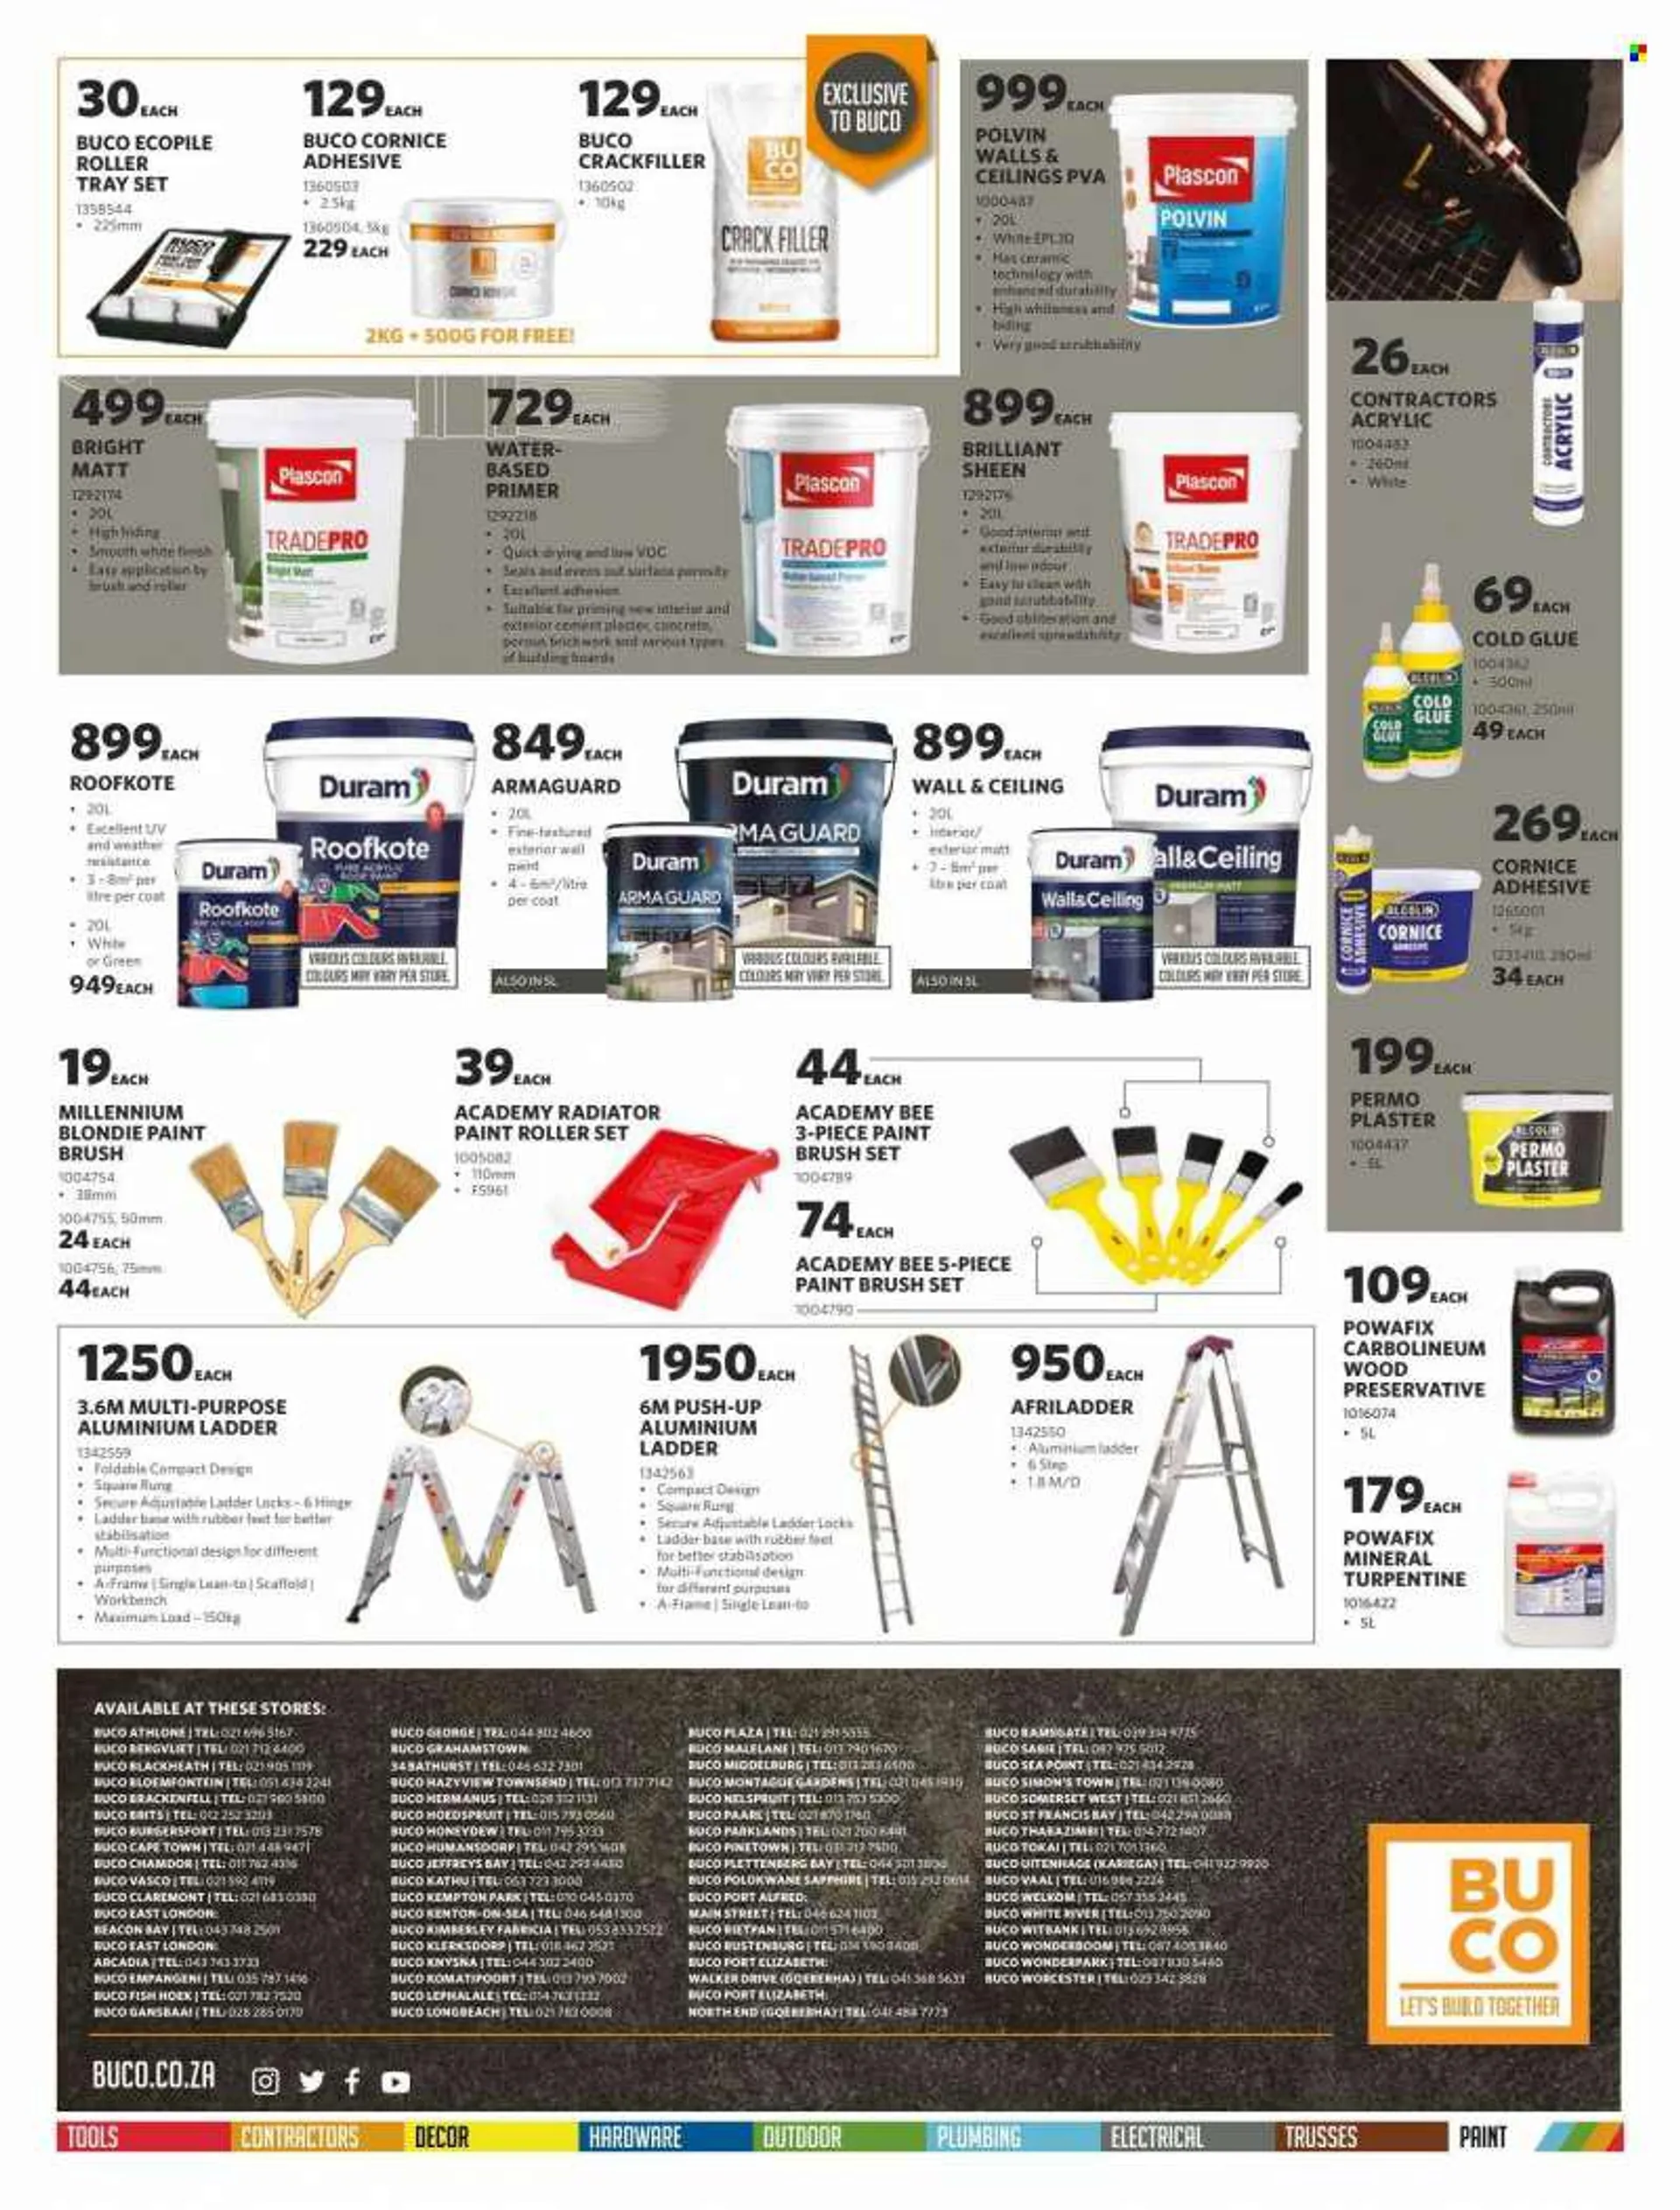 BUCO catalogue  - 22/06/2022 - 10/07/2022 - Sales products - kettle, roller, ladder, glue, adhesive, paint brush, brush set, roller tray set, Duram, work bench, roof paint. Page 4.